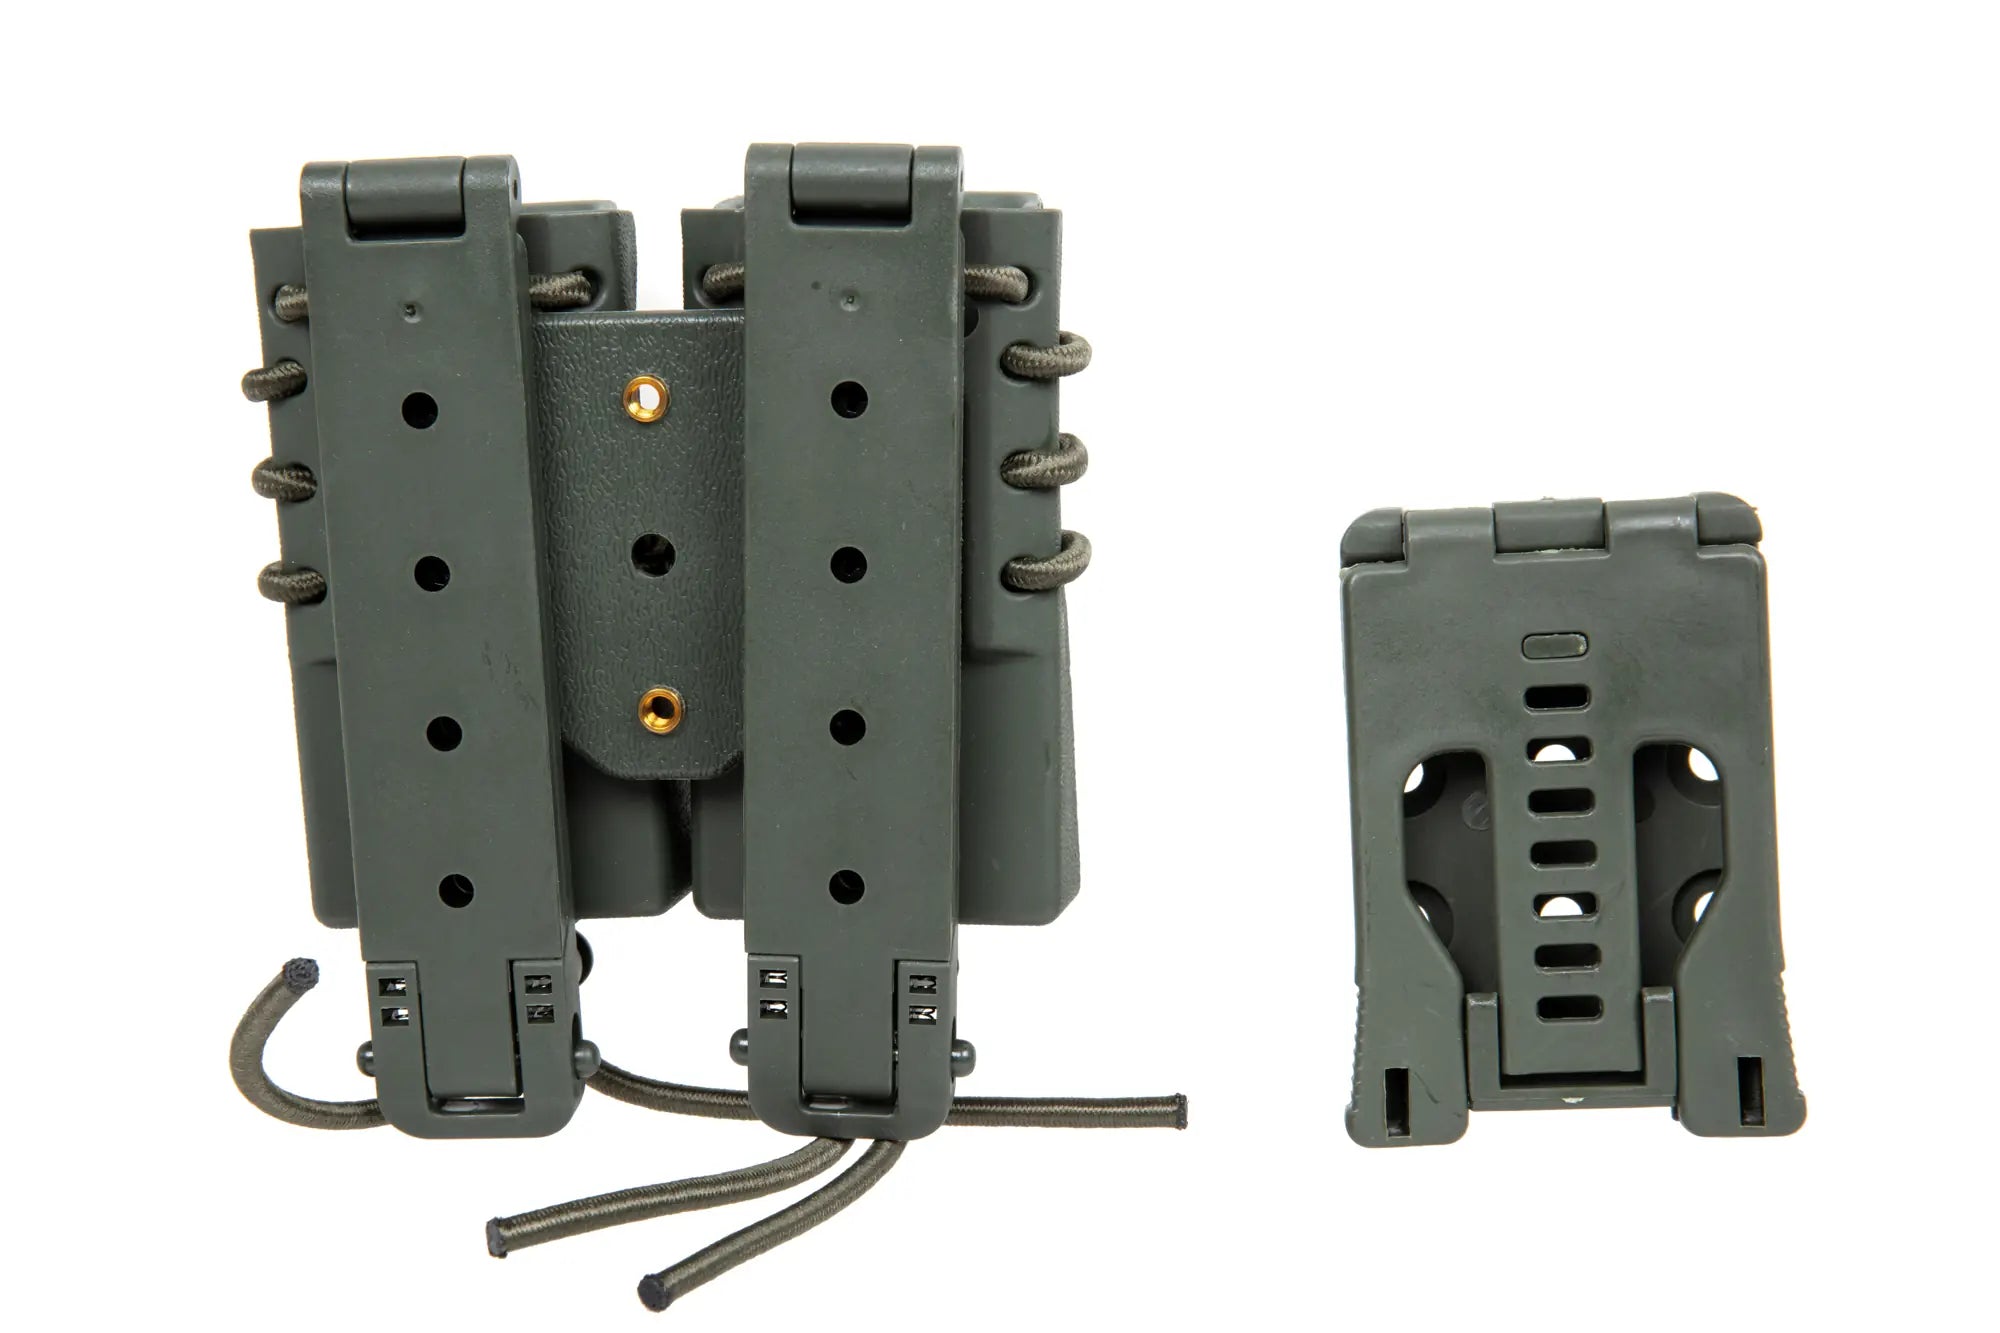 Carrier for 2 9mm magazines Wosport Urban Assault Quick Pull Olive-1